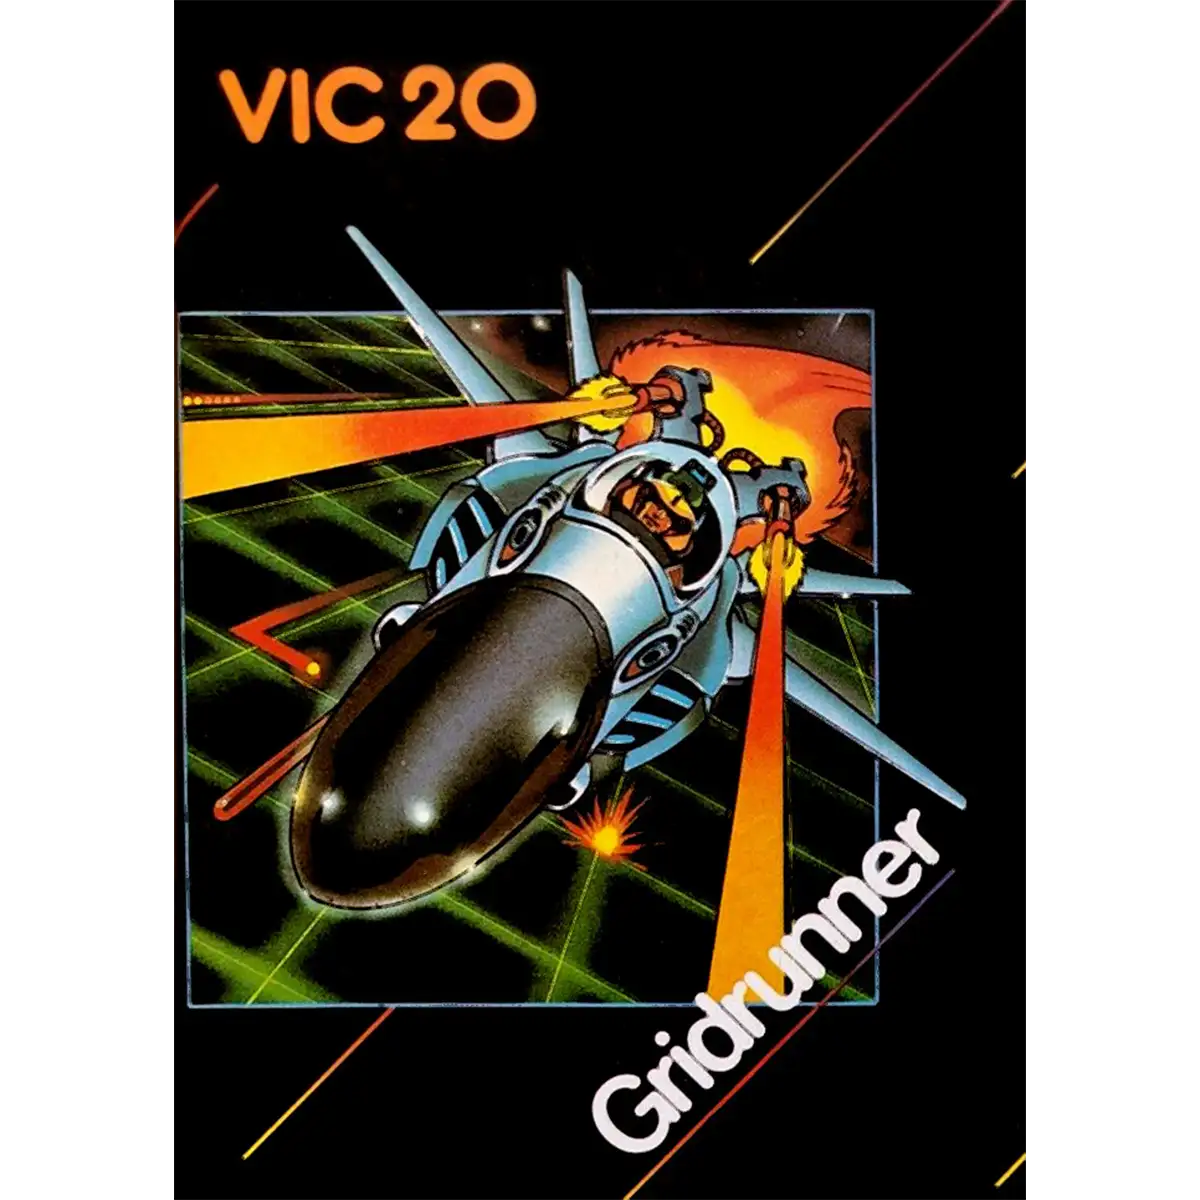 THE VIC 20 - Limited Edition C64 Image 8